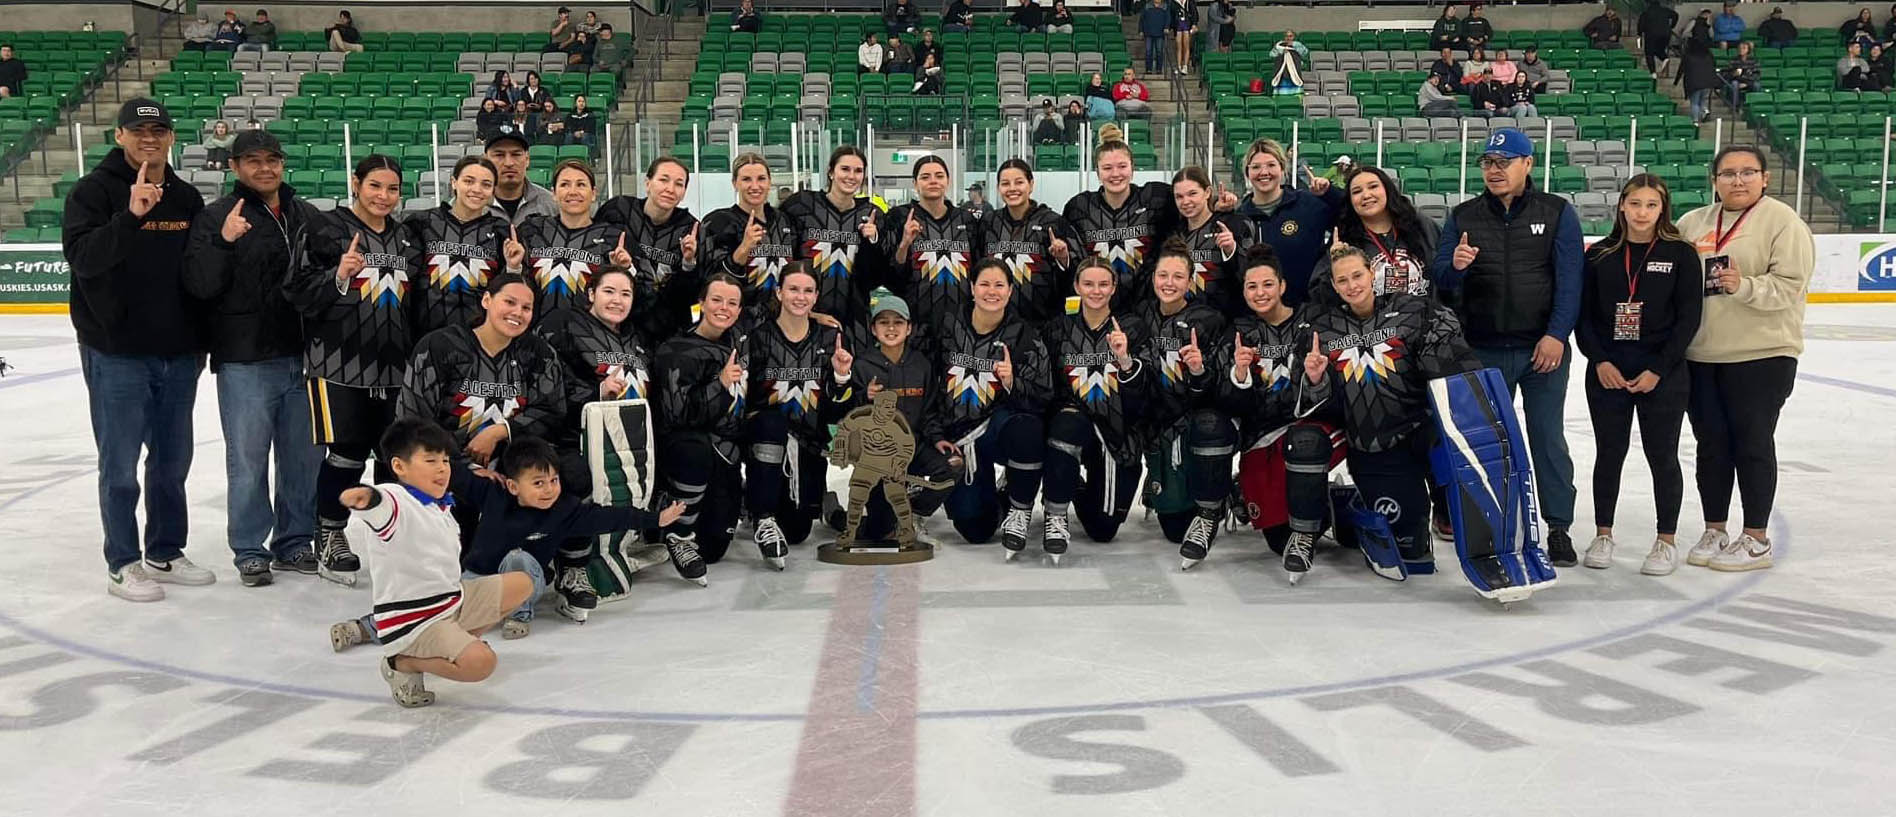 woman's hockey team gather for photo on the ice.